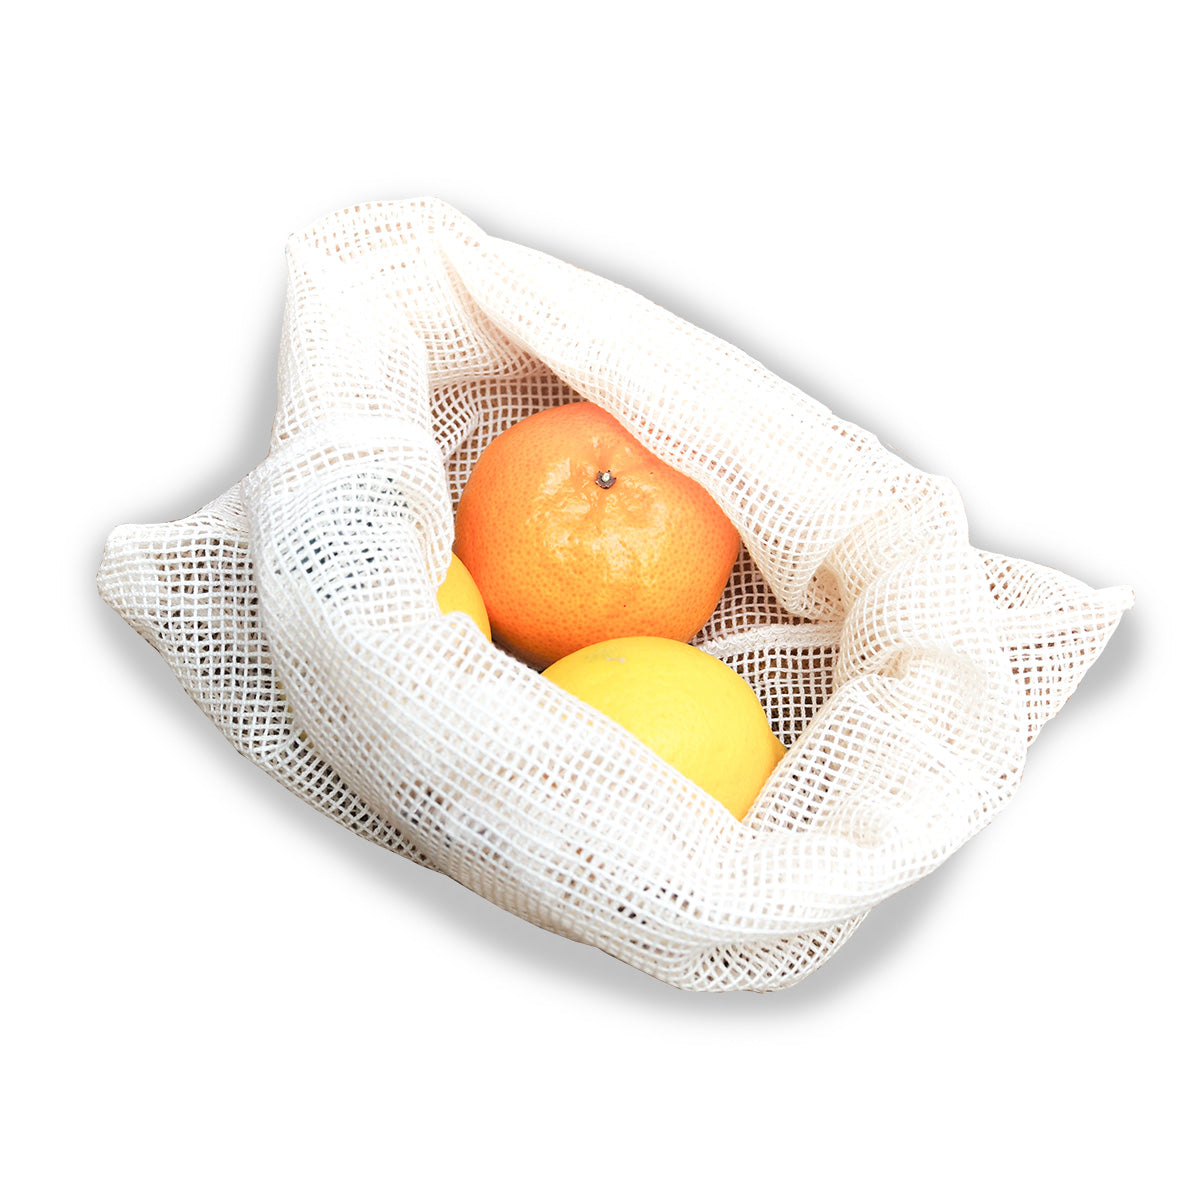 reusable zero waste cotton produce bags with 2 lemons and an orange inside. Adelaide Eco Shop.